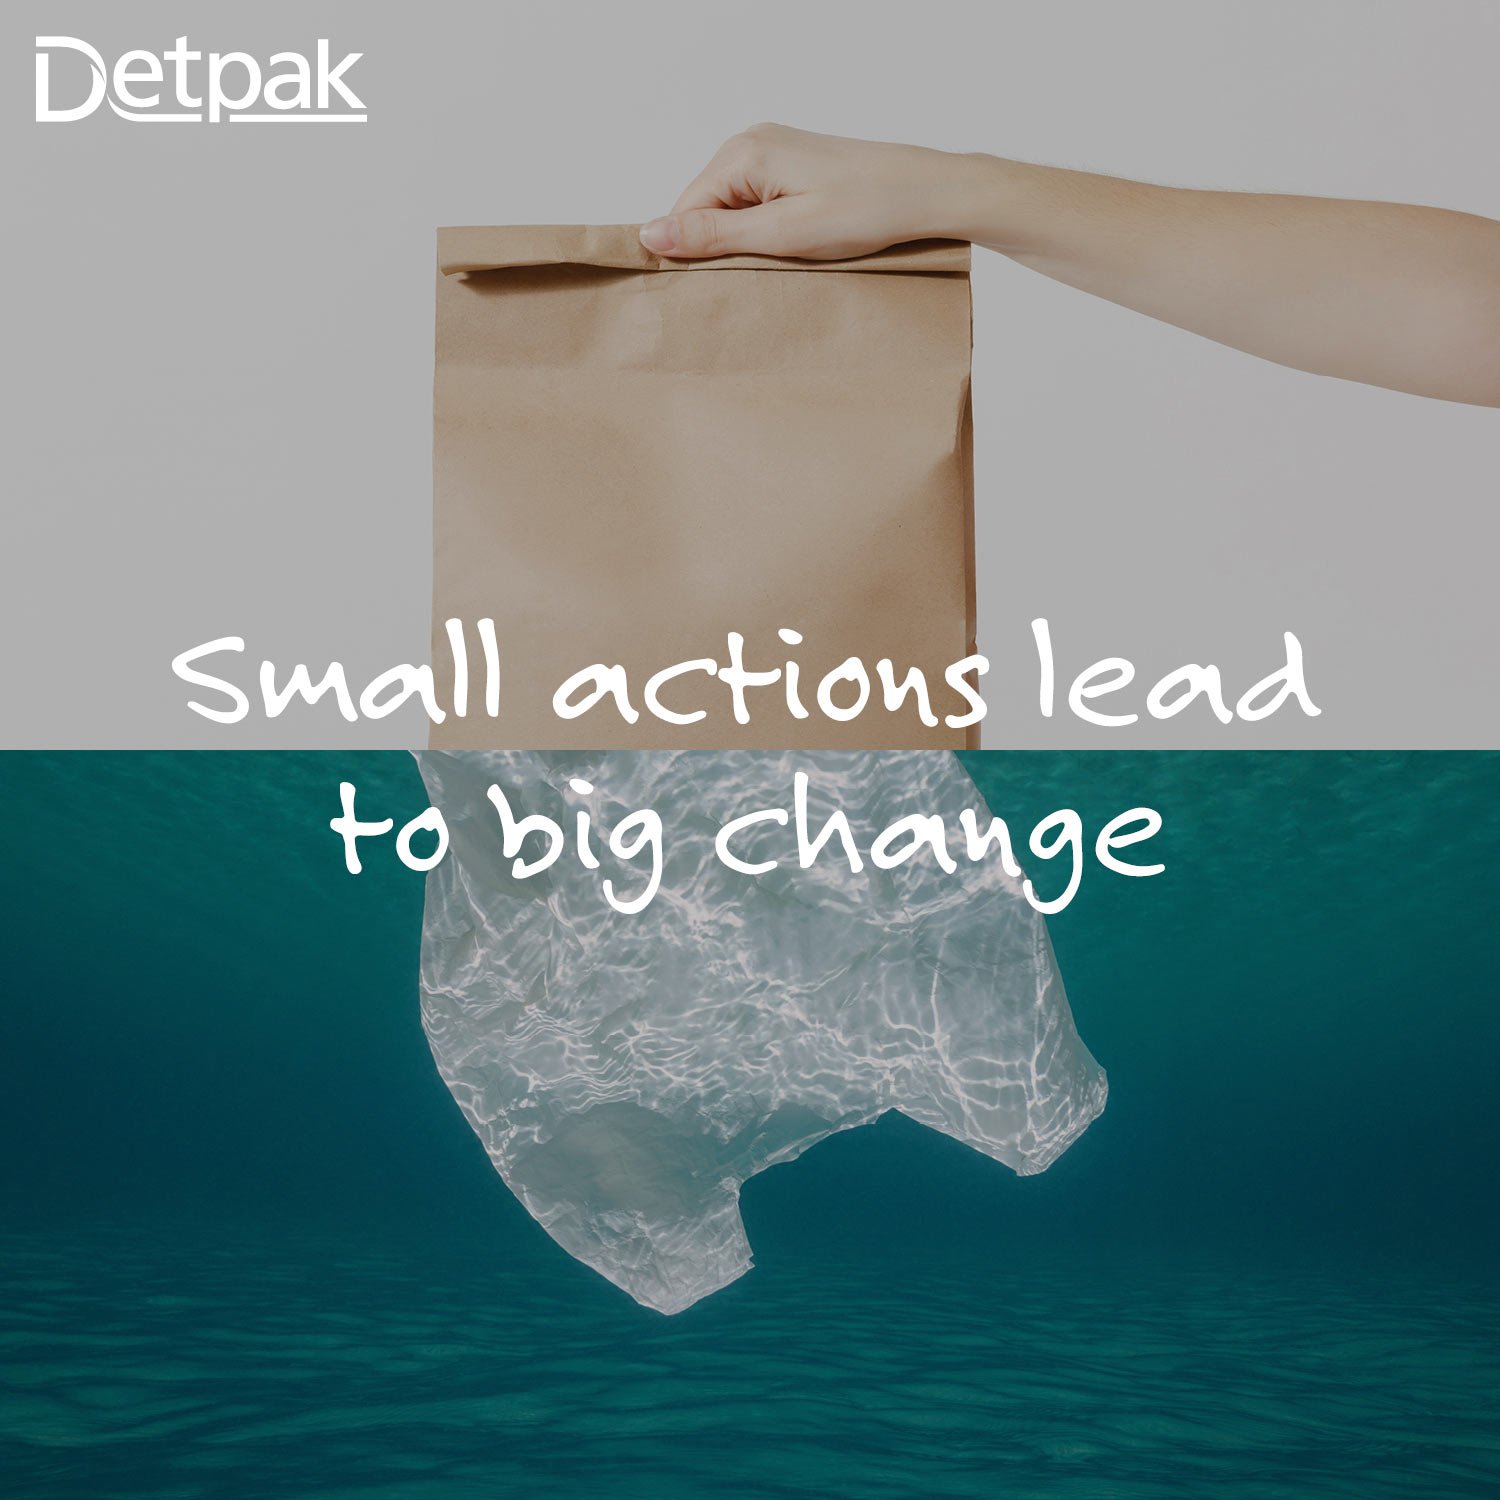 A paper and plastic bag with words "Small actions lead to big change' 